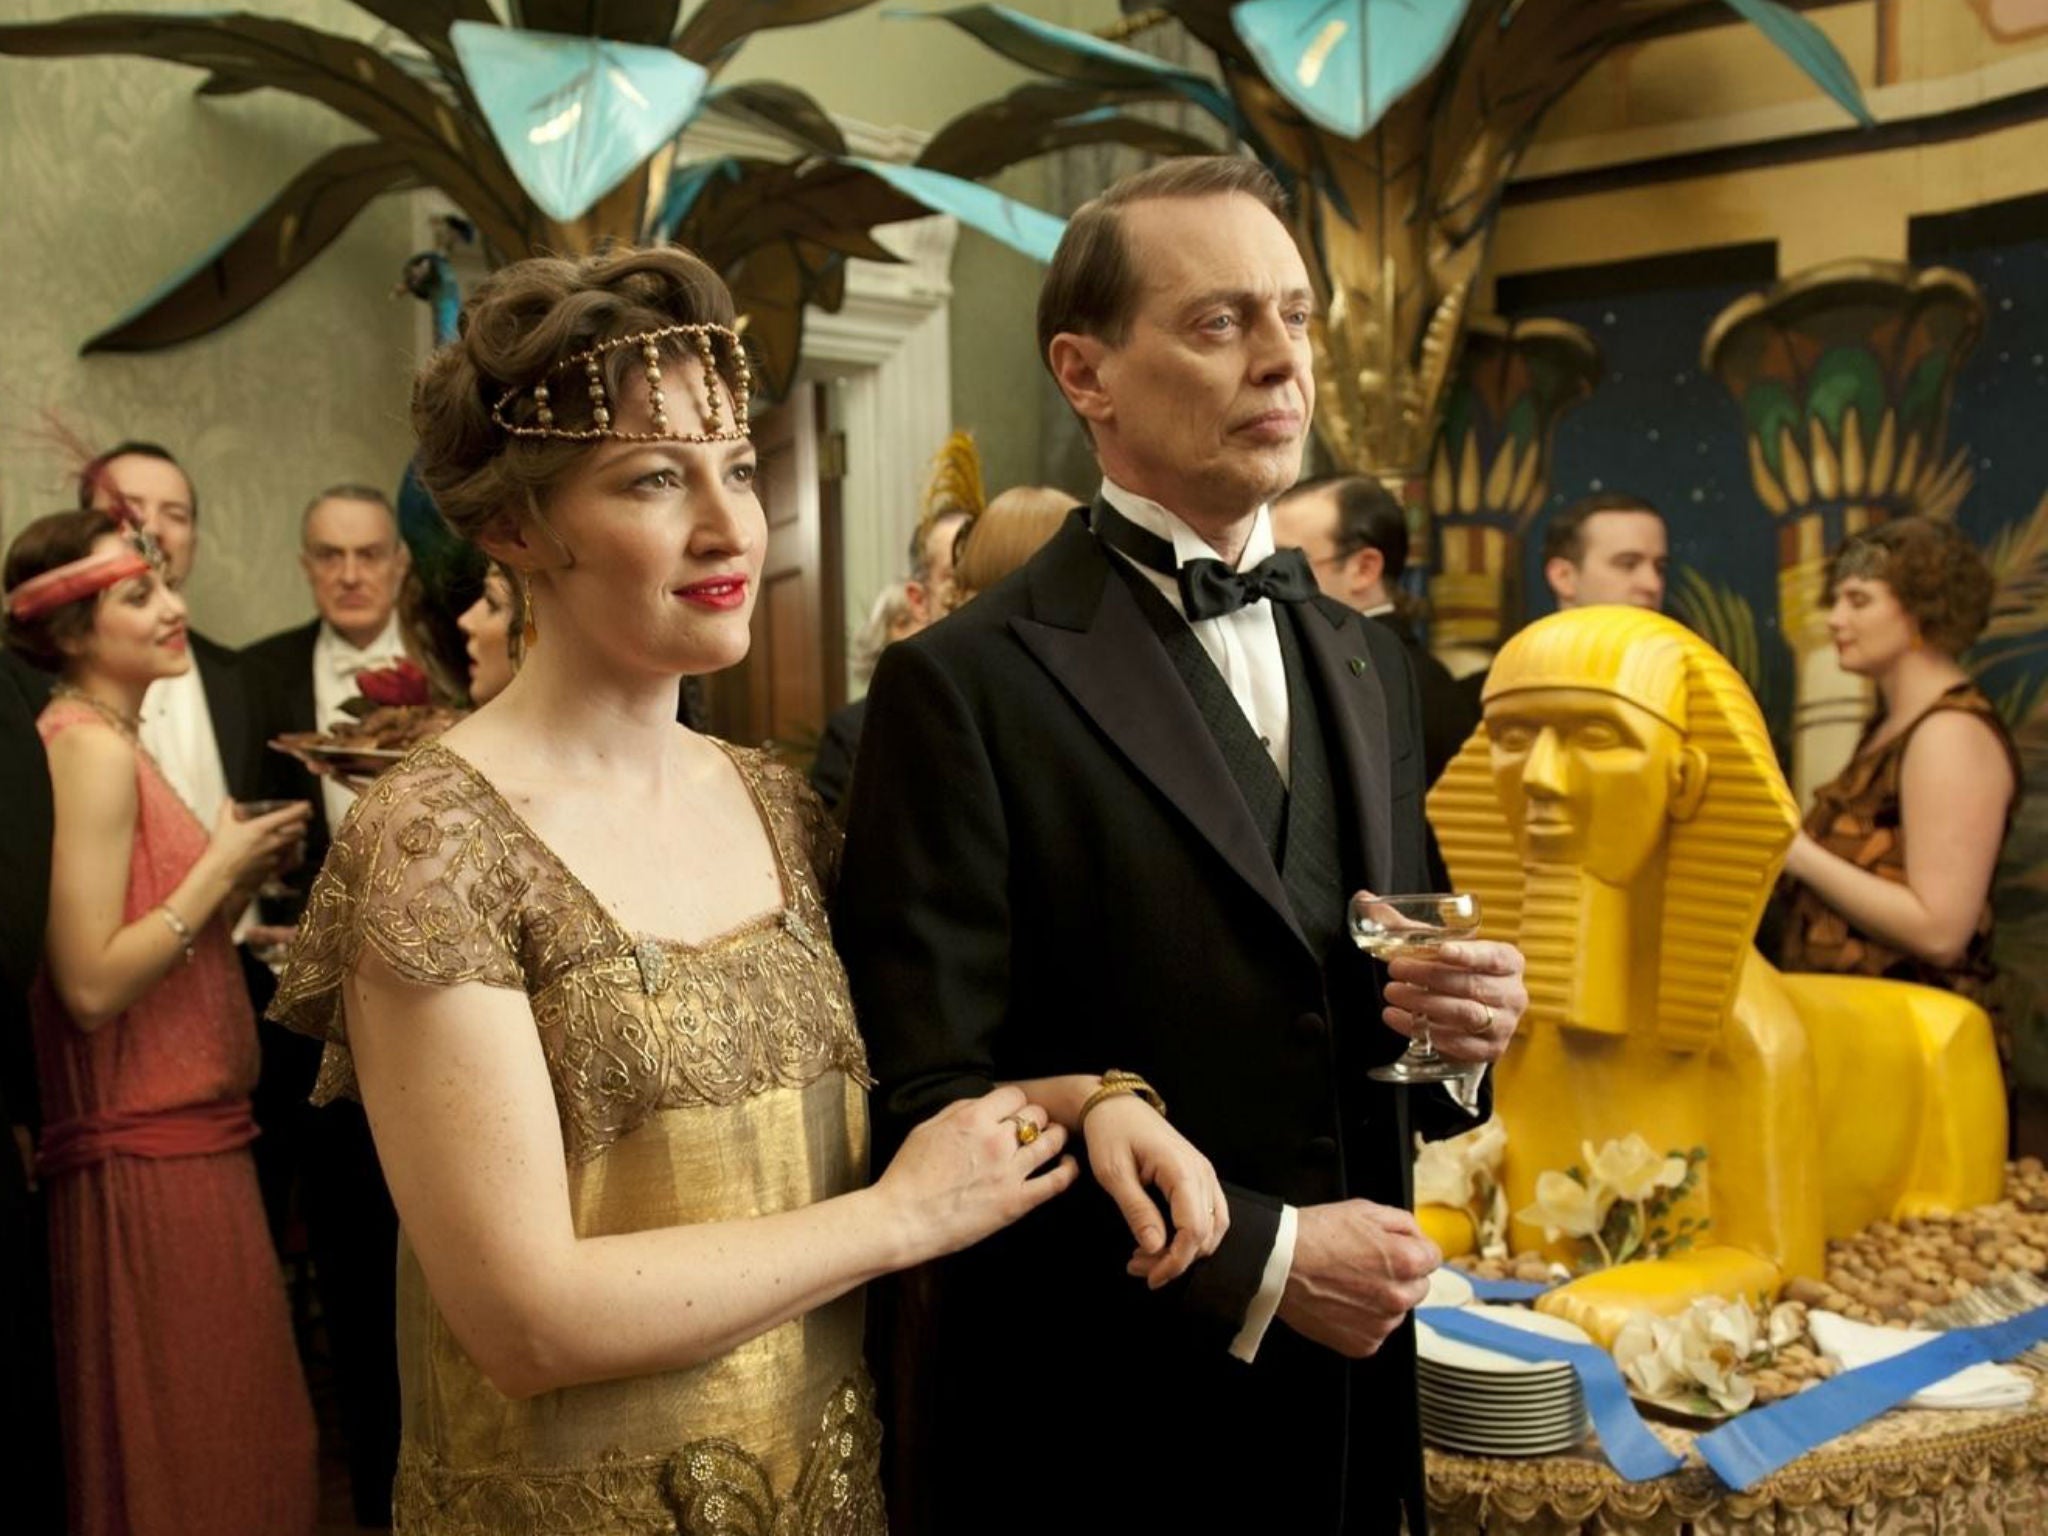 Macdonald became more known in the US following her role opposite Steve Buscemi in ‘Boardwalk Empire’